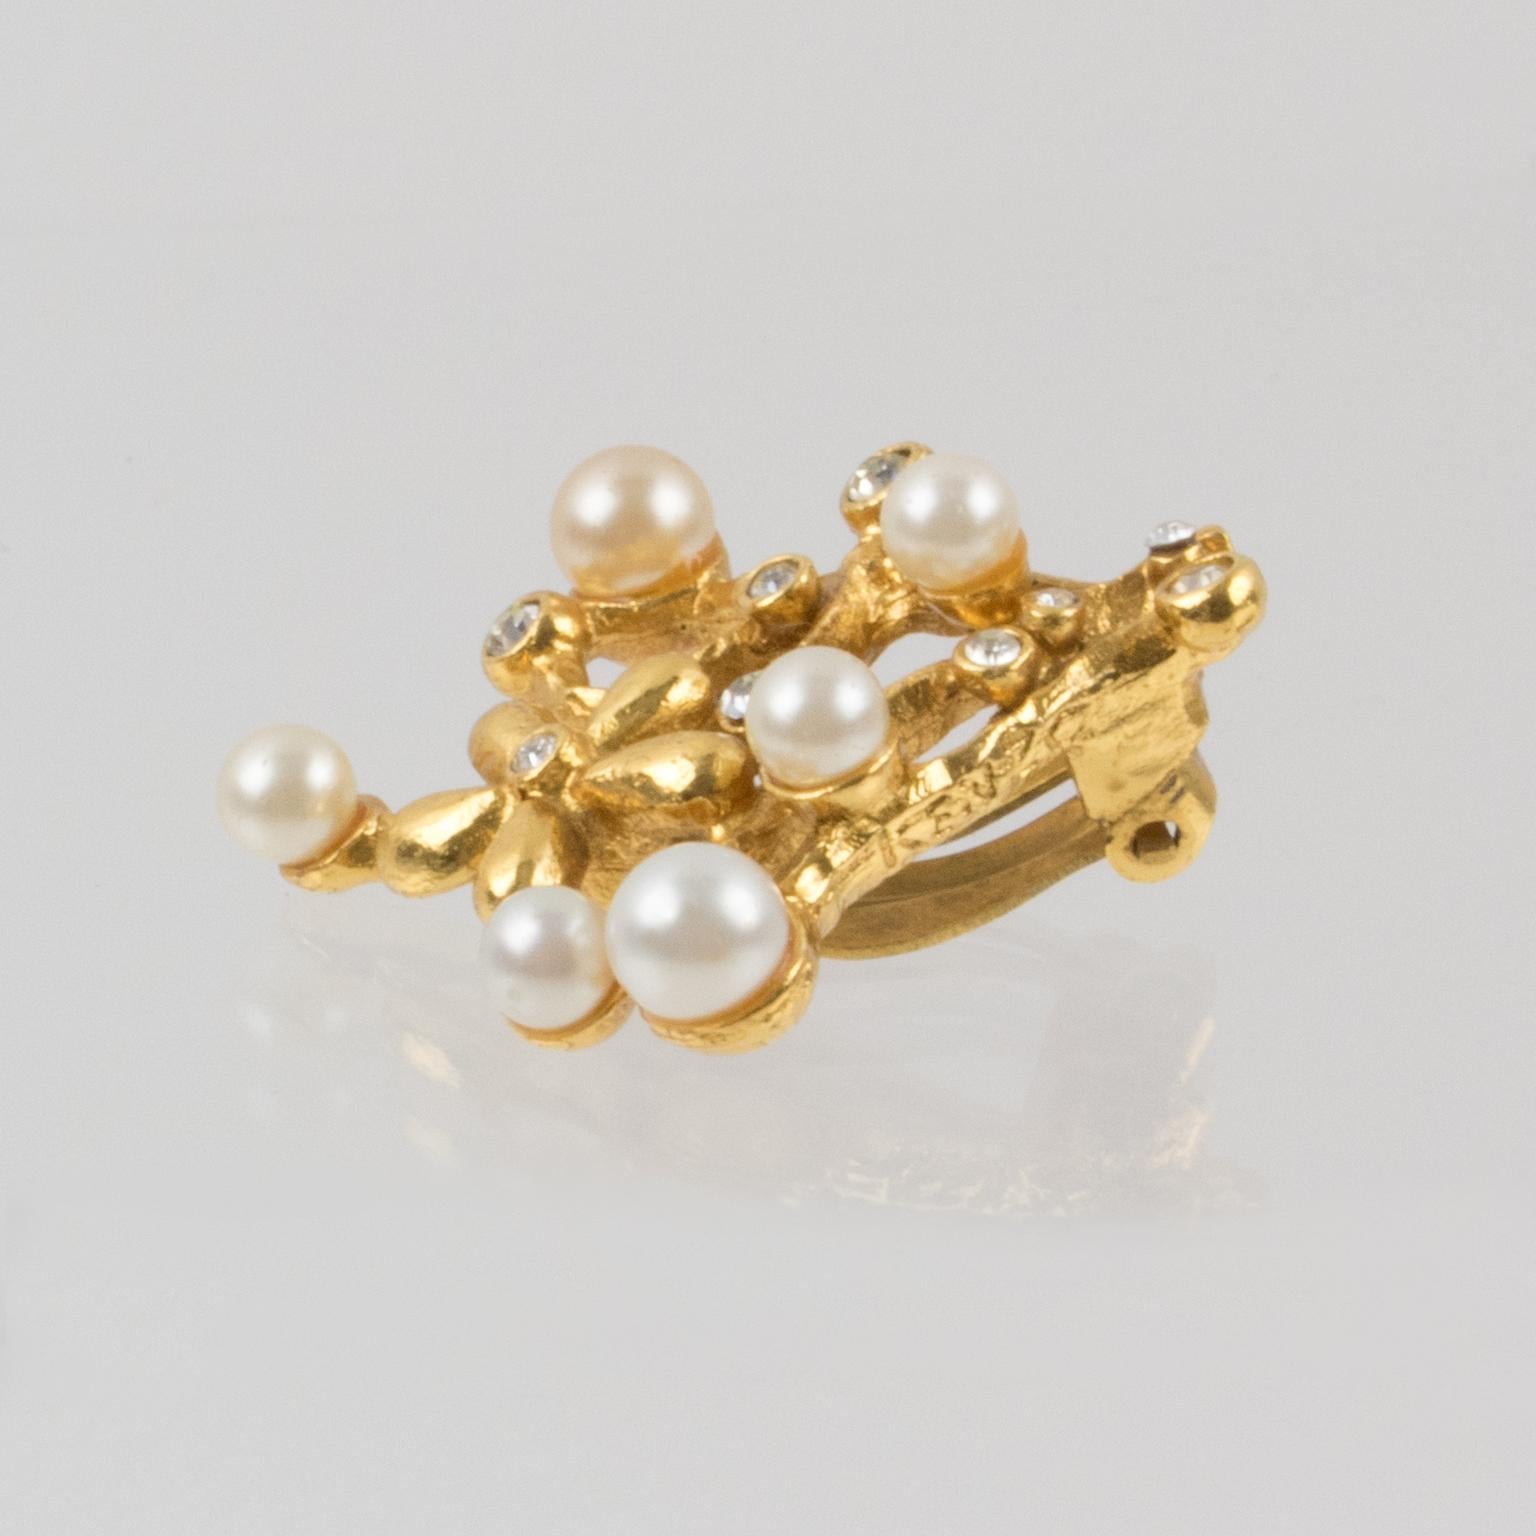 Kenzo Jeweled Clip Earrings with Floral Pearls In Excellent Condition For Sale In Atlanta, GA